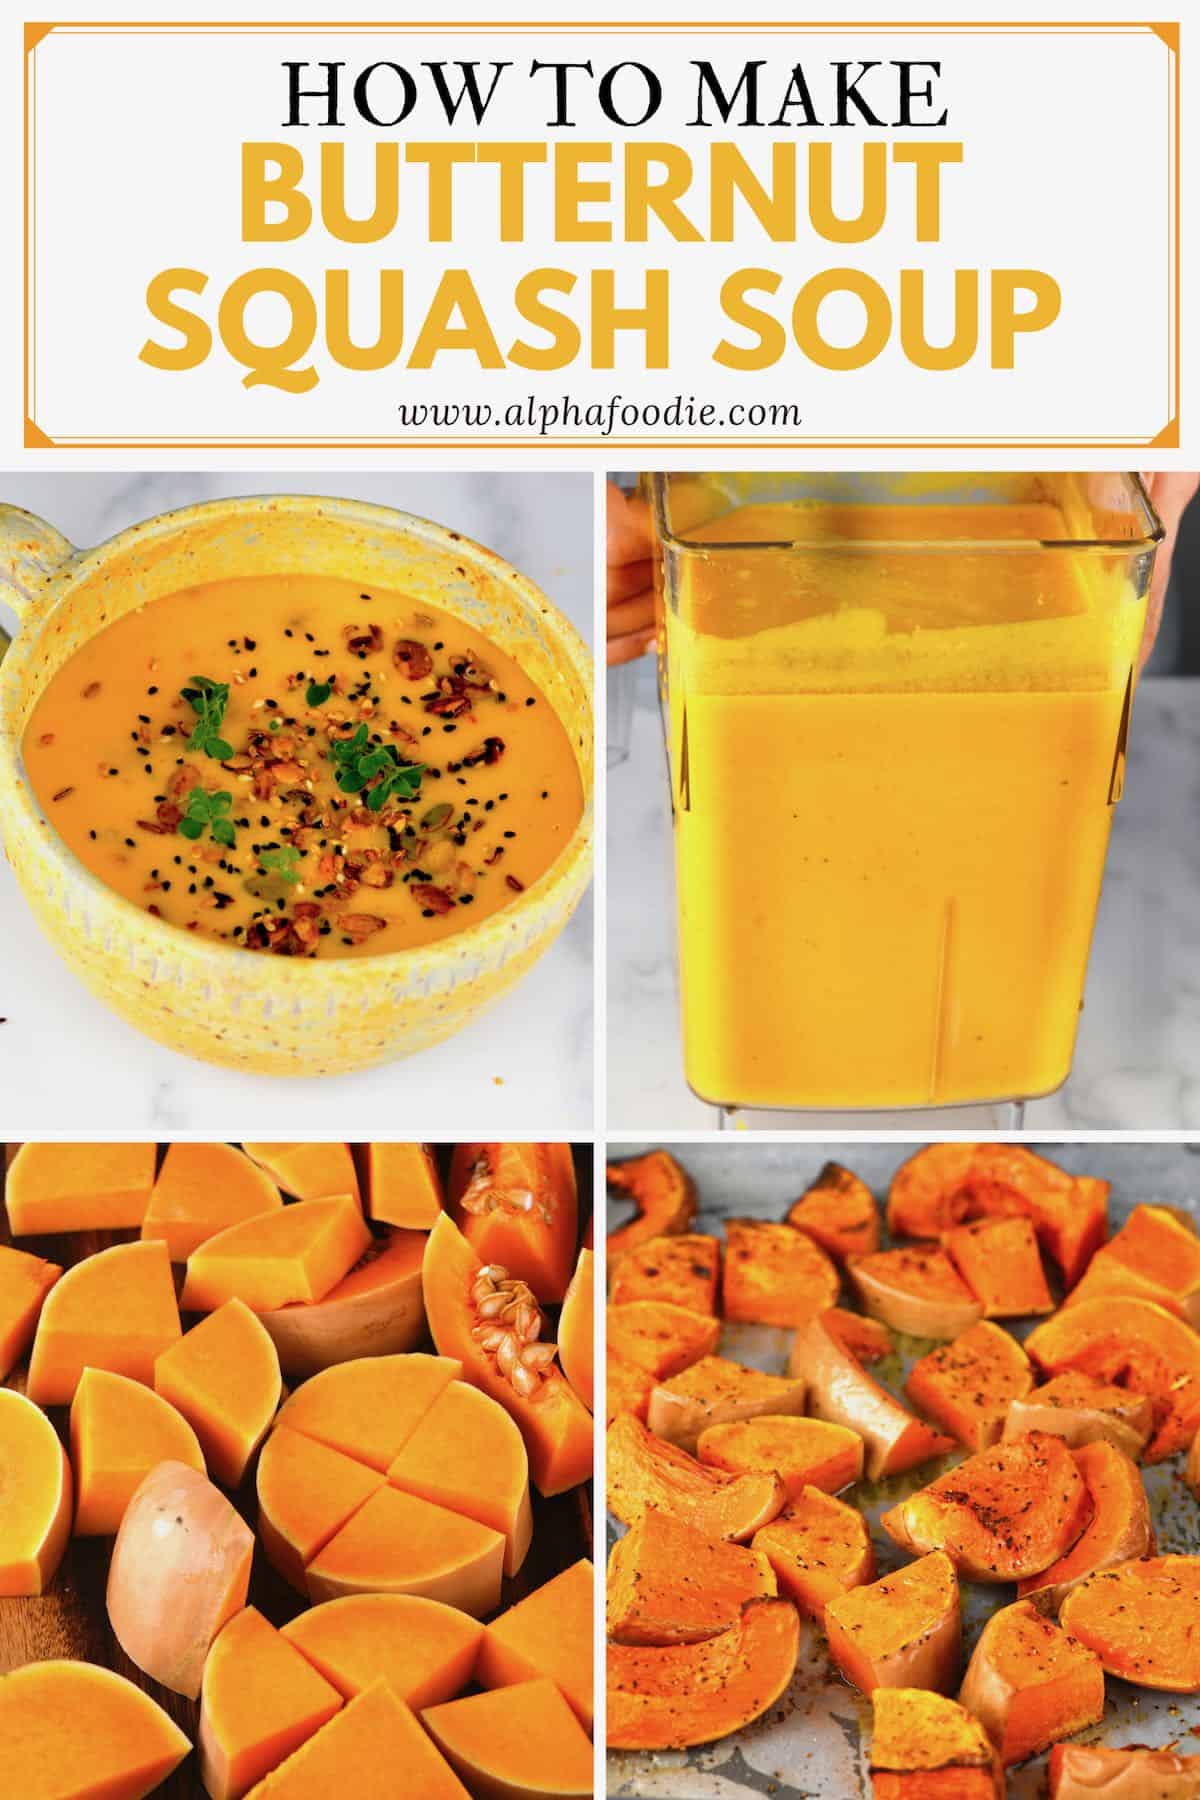 Best Roasted Butternut Squash Soup - Alphafoodie